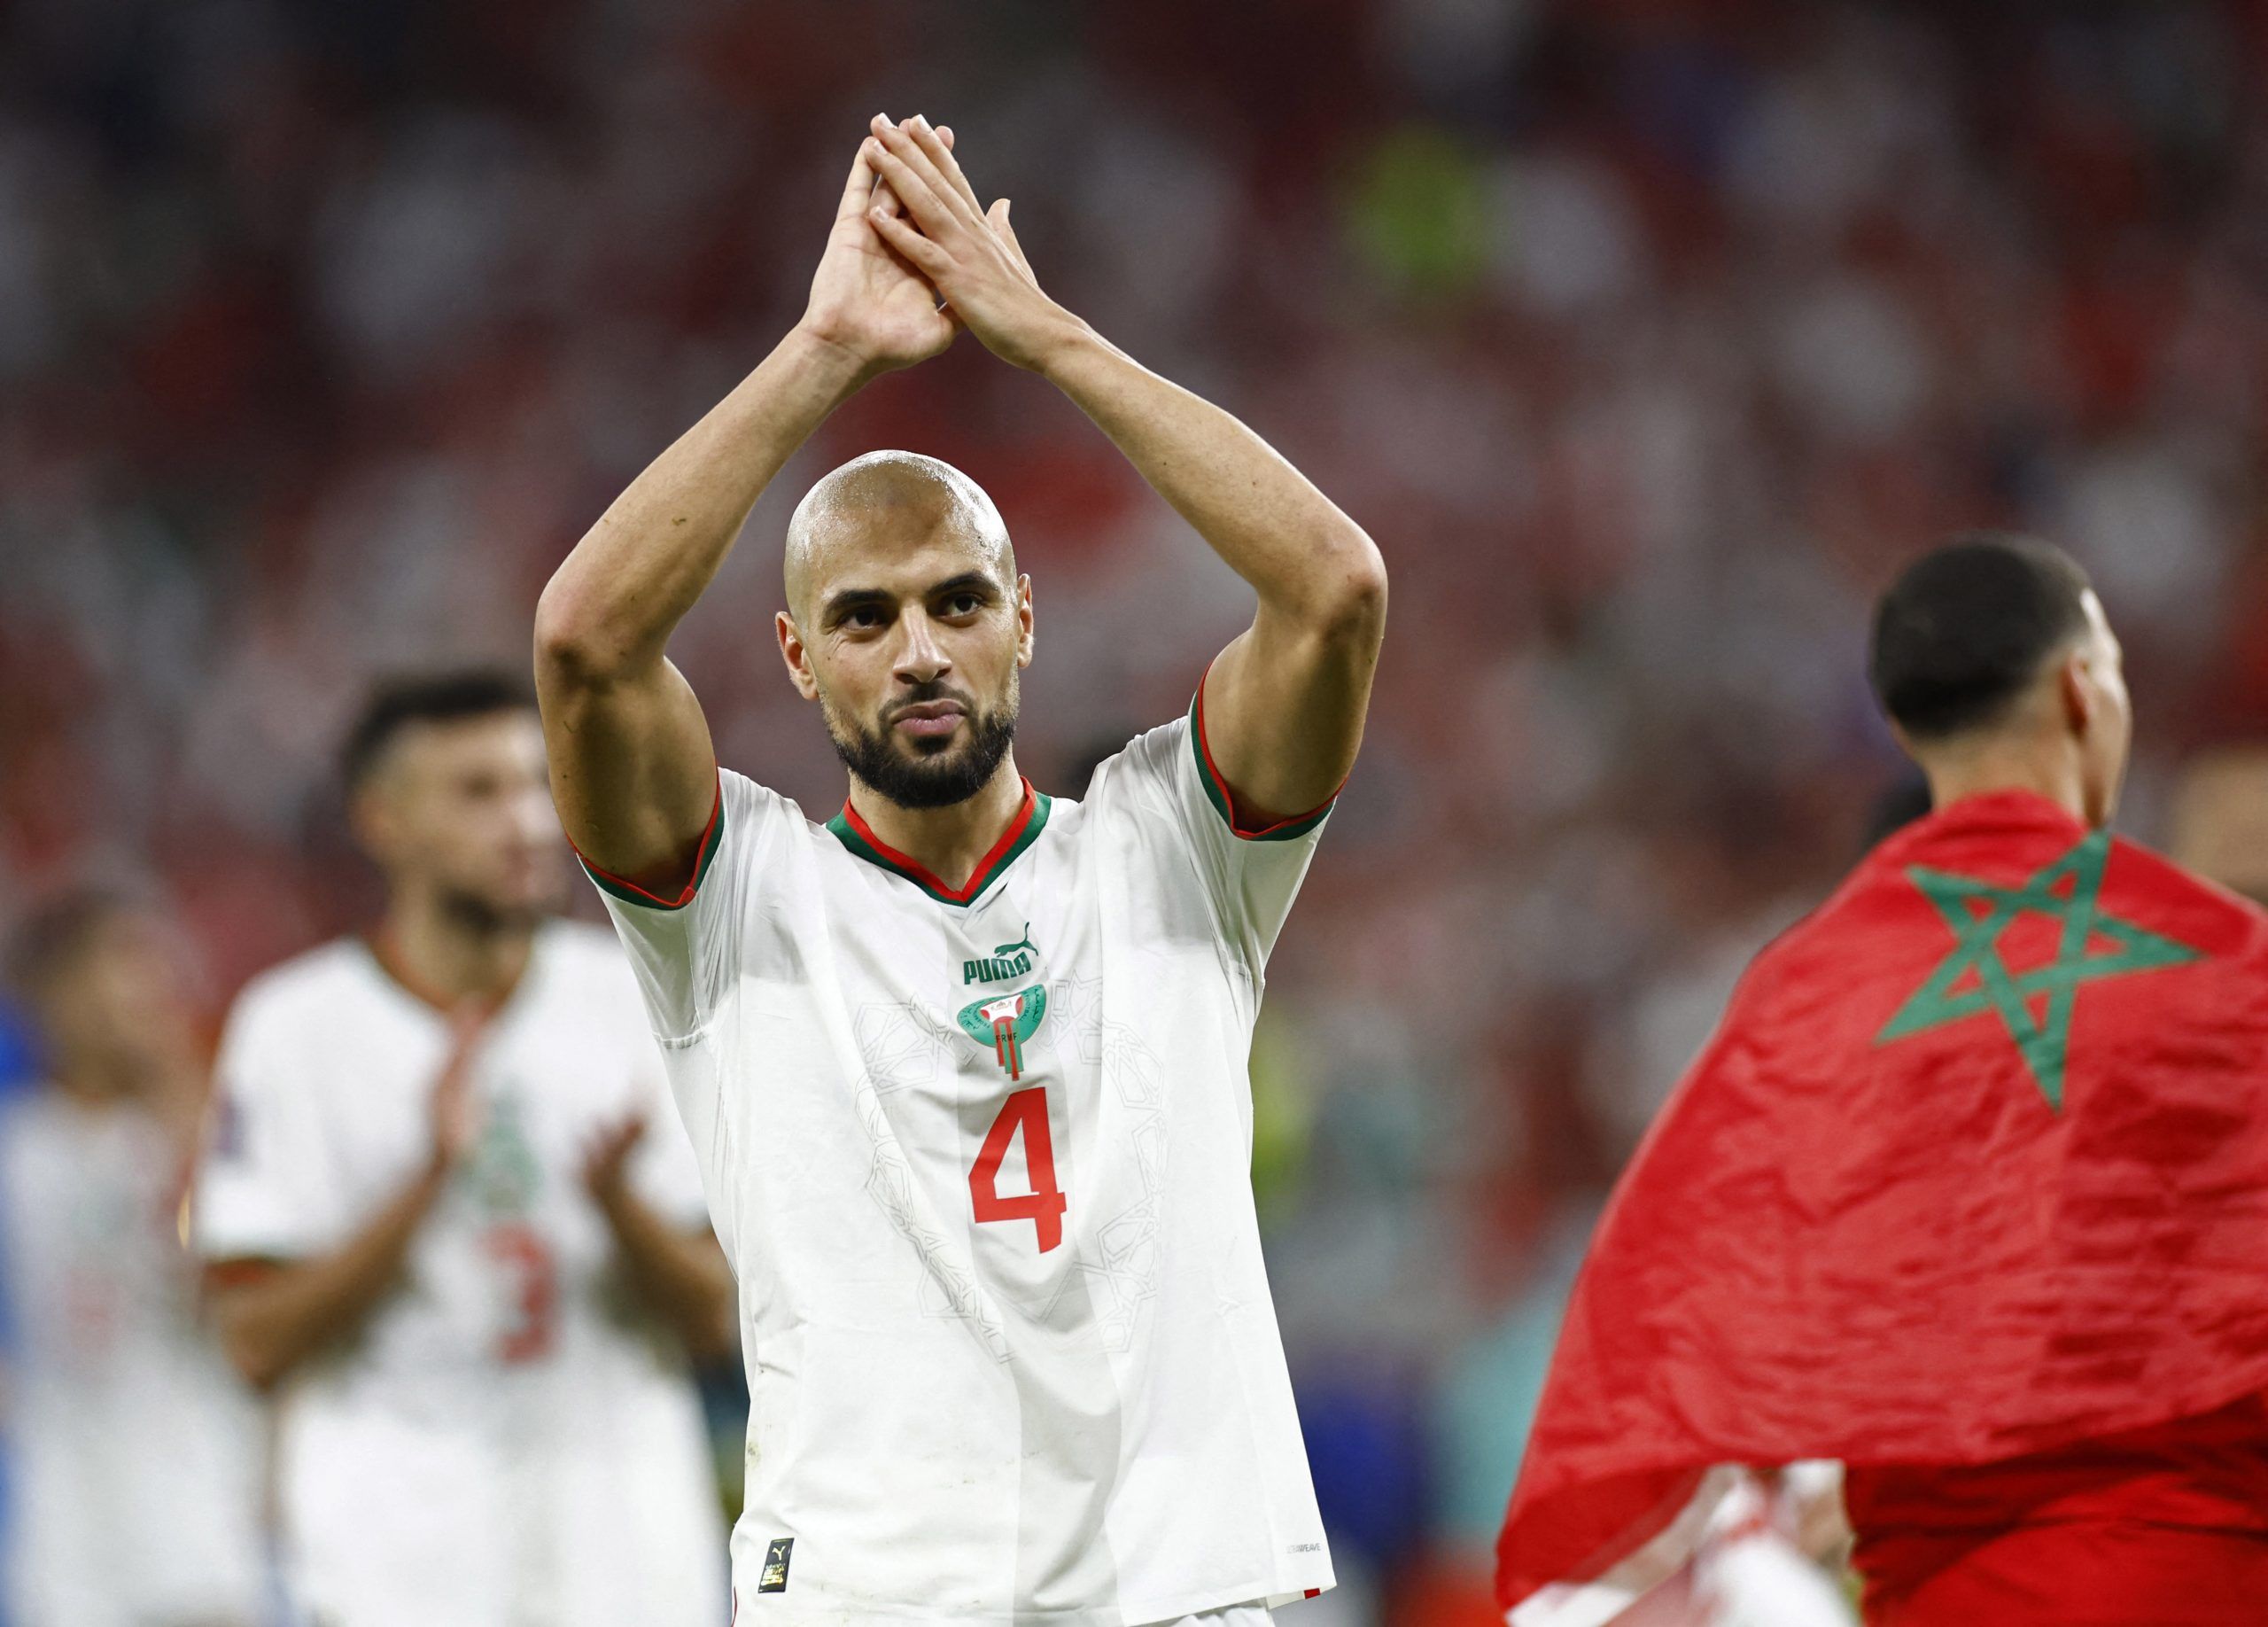 Liverpool interested in signing Amrabat | The Transfer Tavern